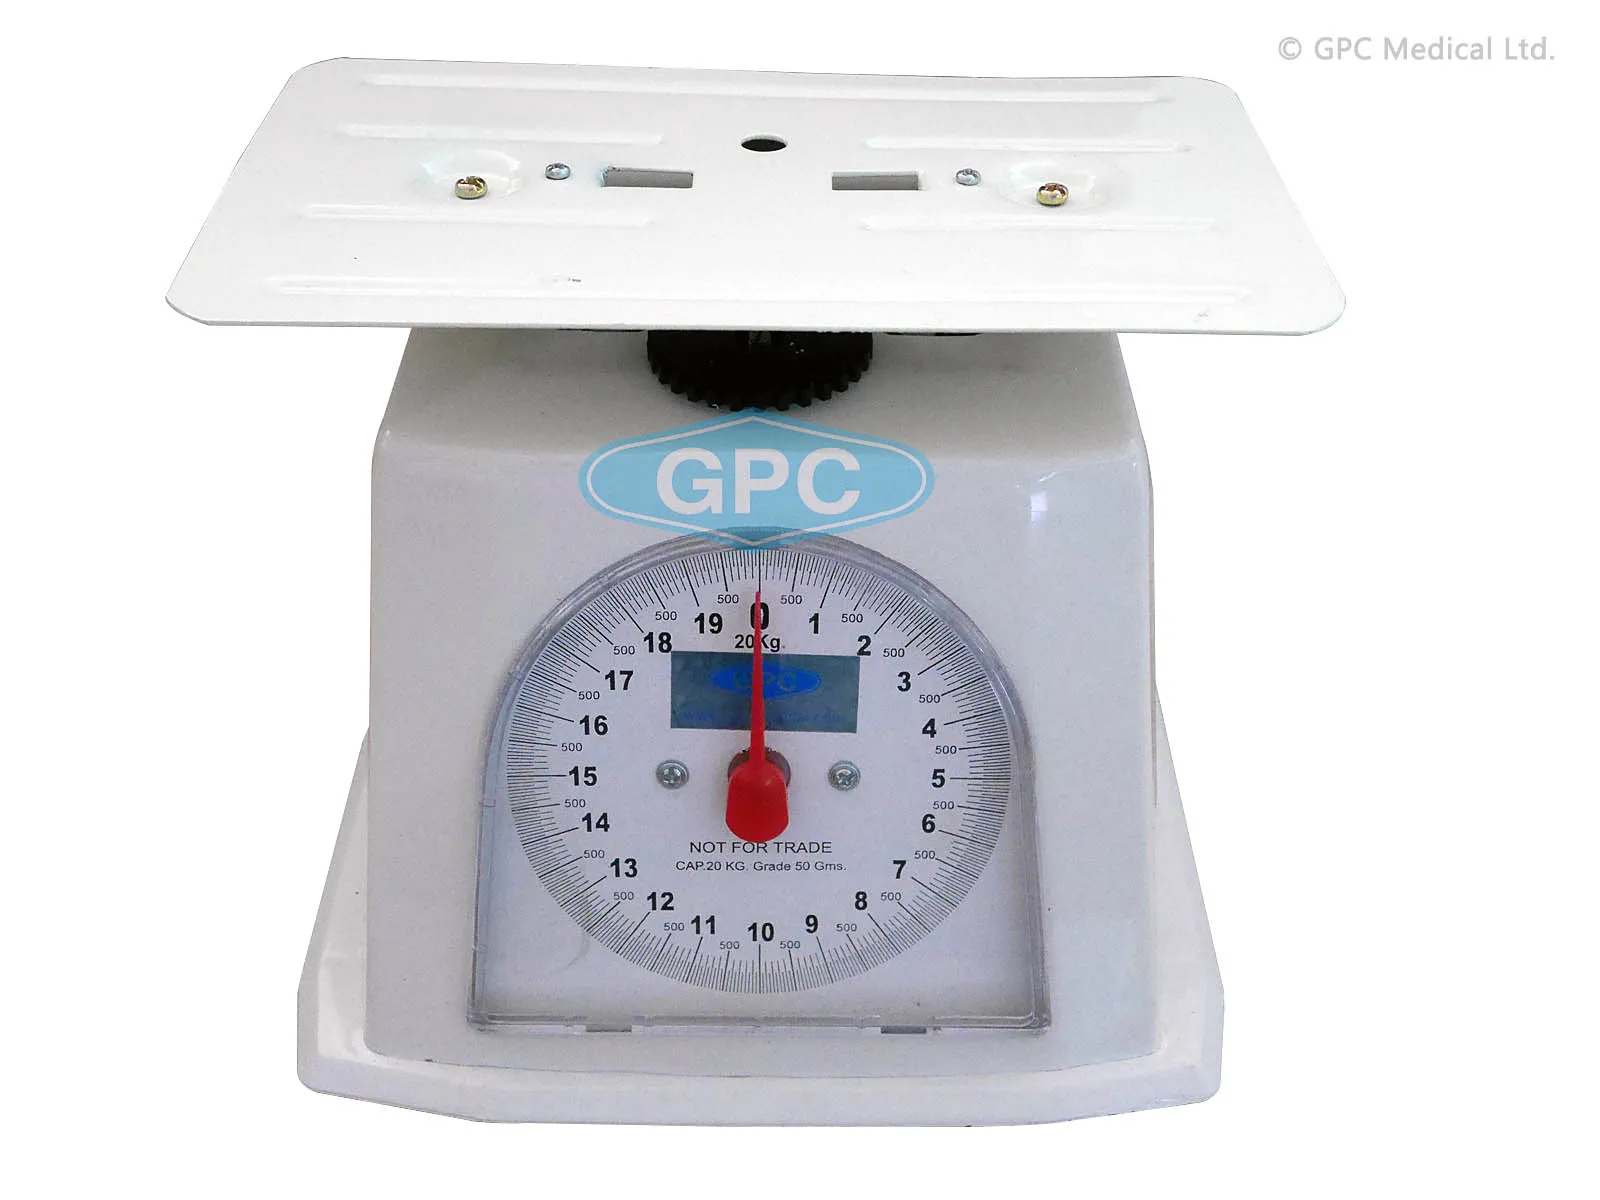 https://www.gpcmedical.com/product_more_images-webp/Digital-Baby-Weighing-Scale-Pan-Type-GPS080-1.webp